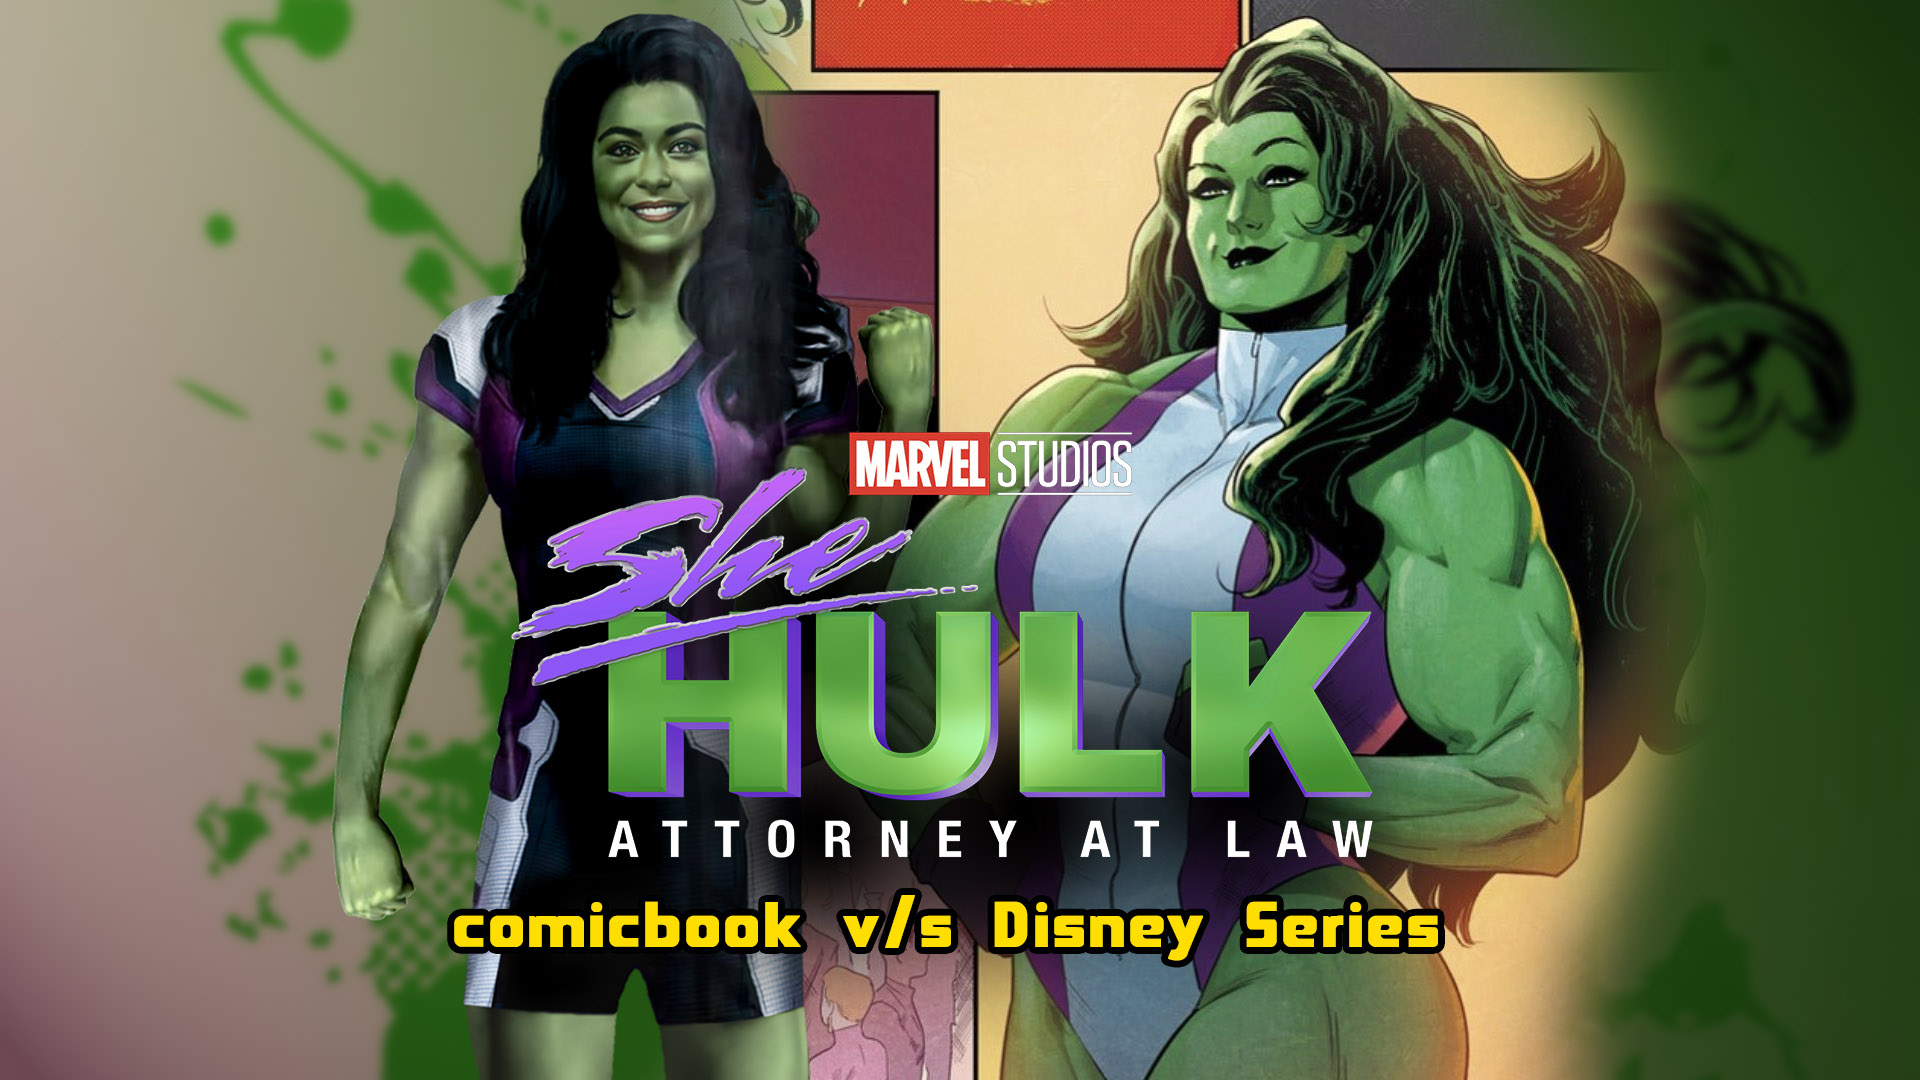 How She Hulk: Attorney At Law Is Different From Comicbook?